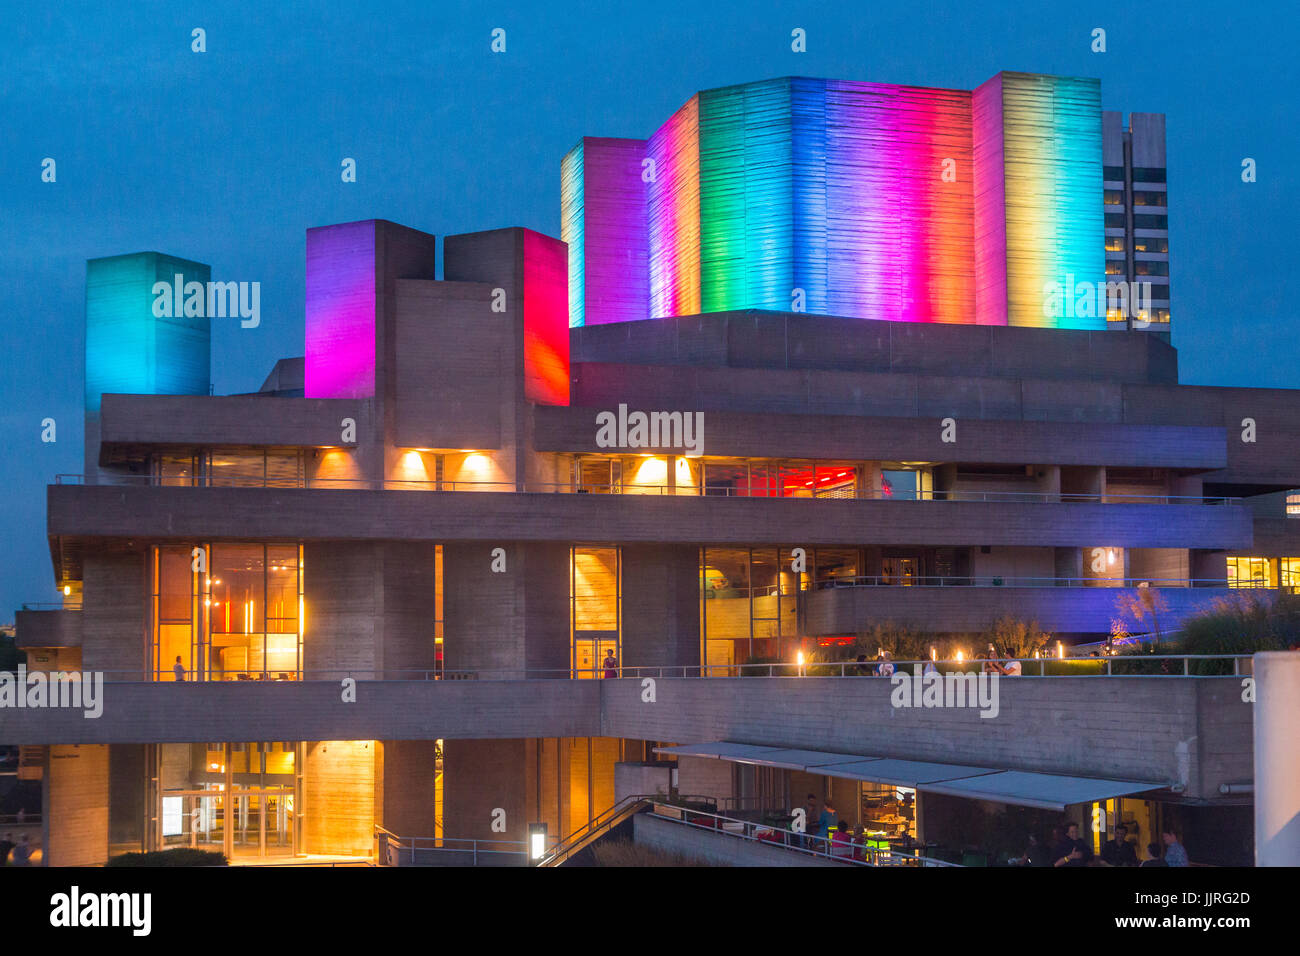 National Theatre lit up in rainbow lights to mark London's Gay Pride celebrations Stock Photo